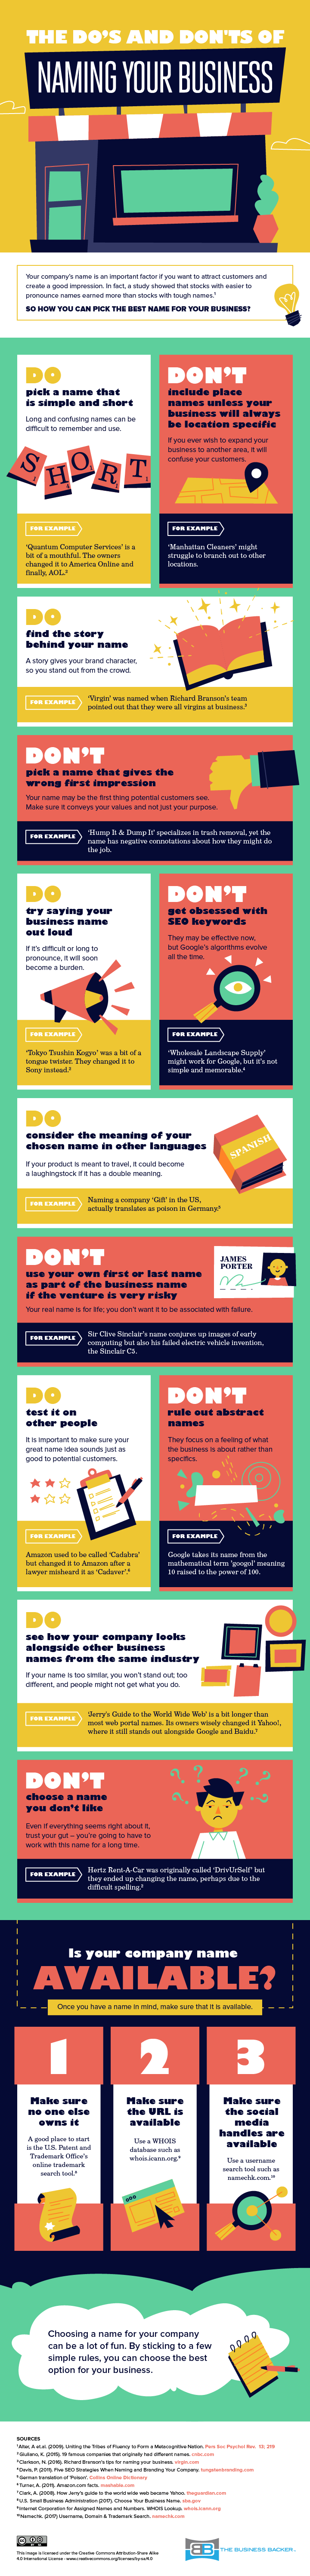 The Do’s and Don’ts of Naming Your Business - #infographic